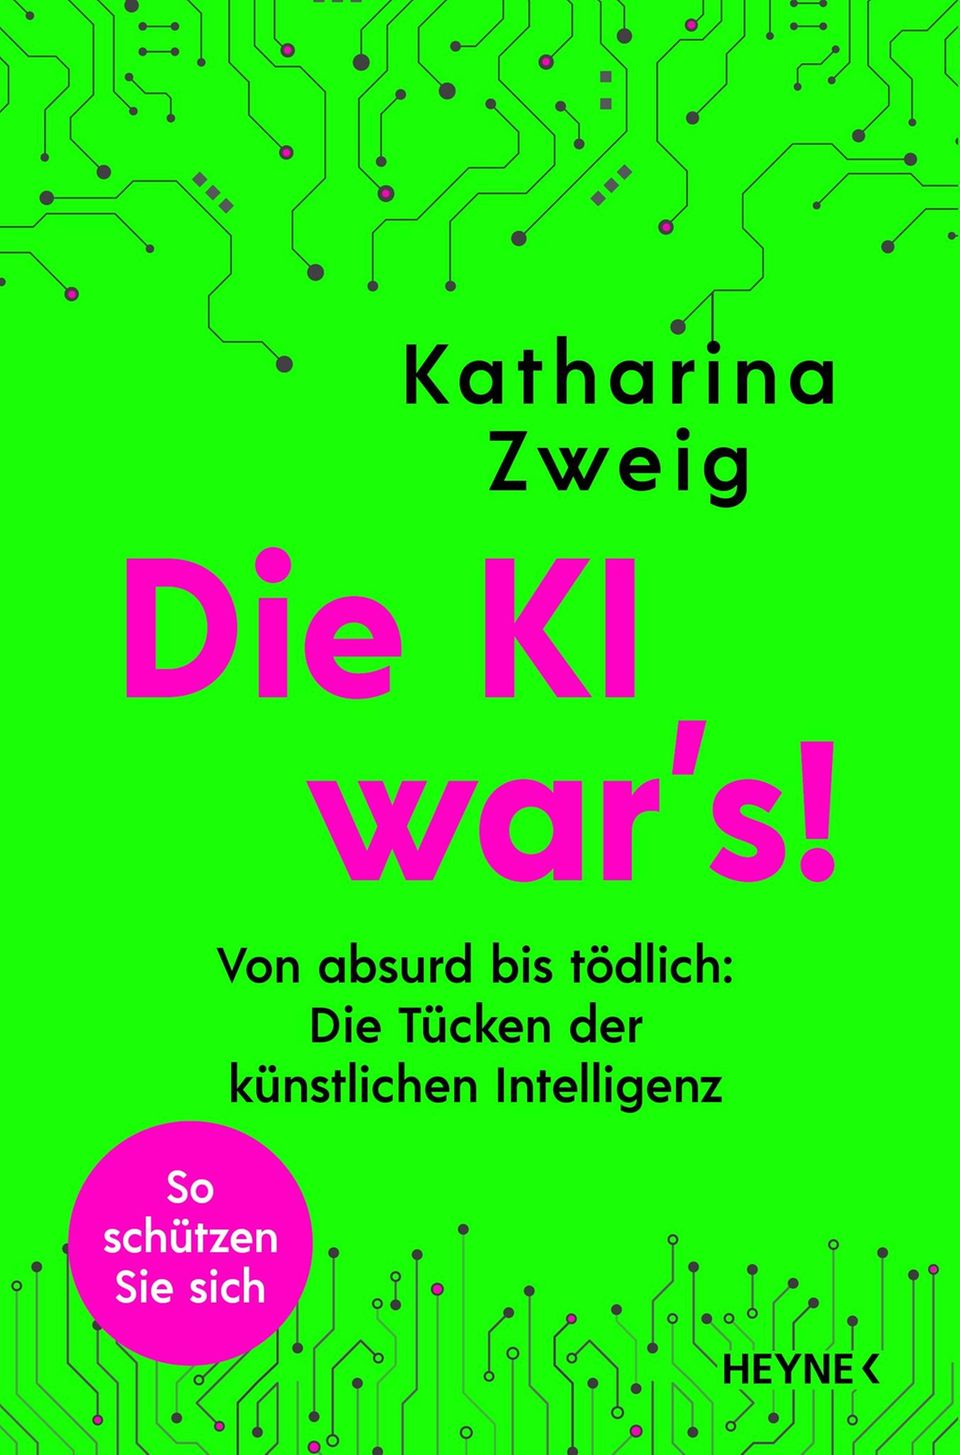 Book cover: “It was the AI” by Kaharina Zweig